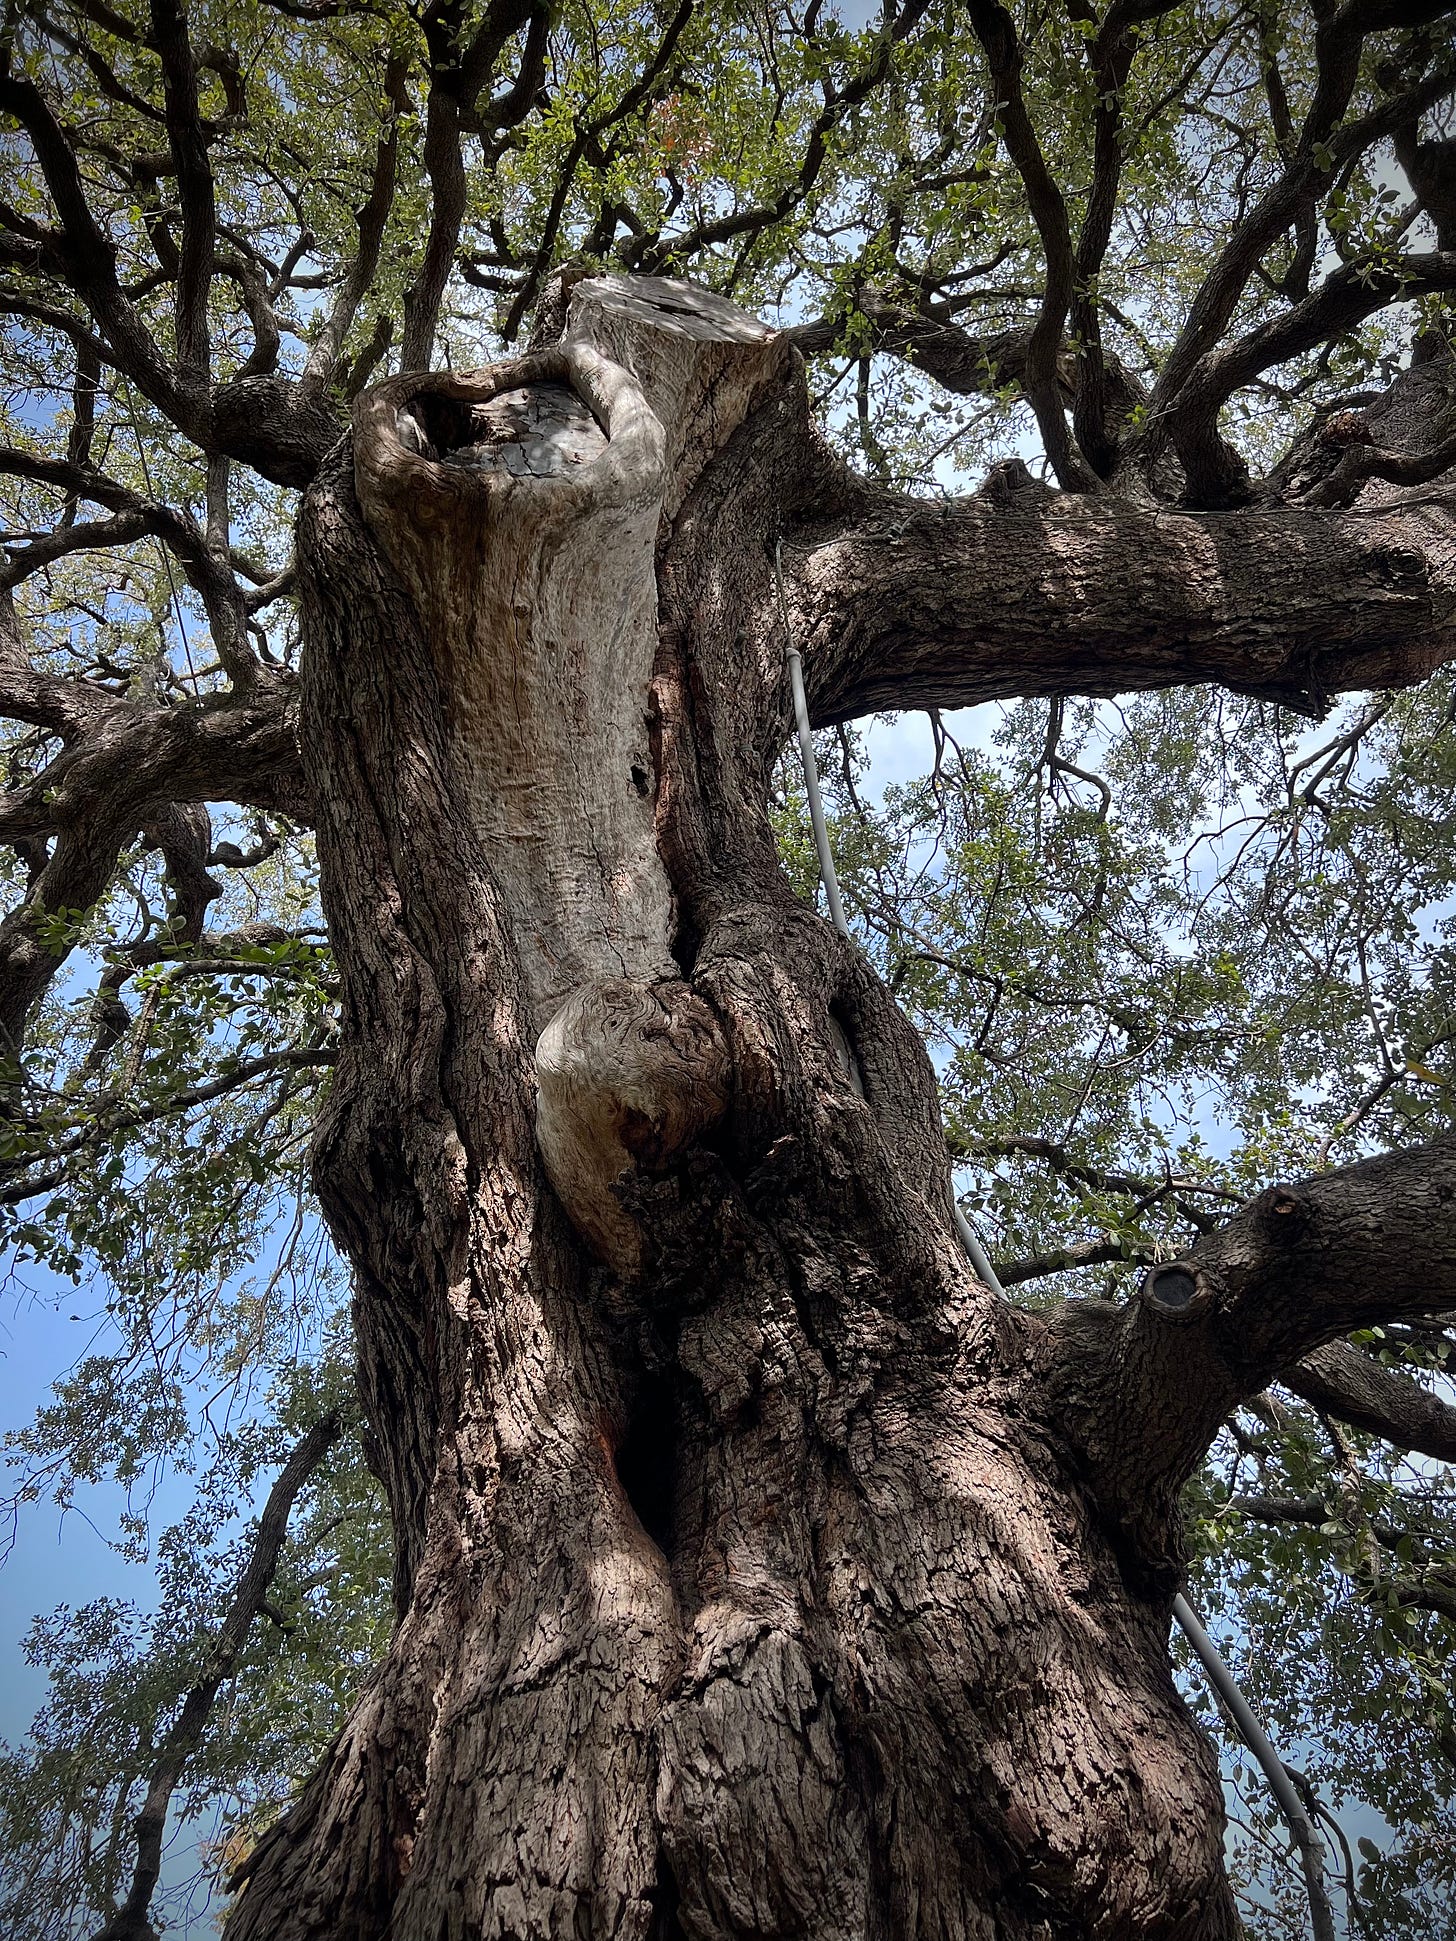 Main trunk of the Treaty Oak, with scar tissue visible